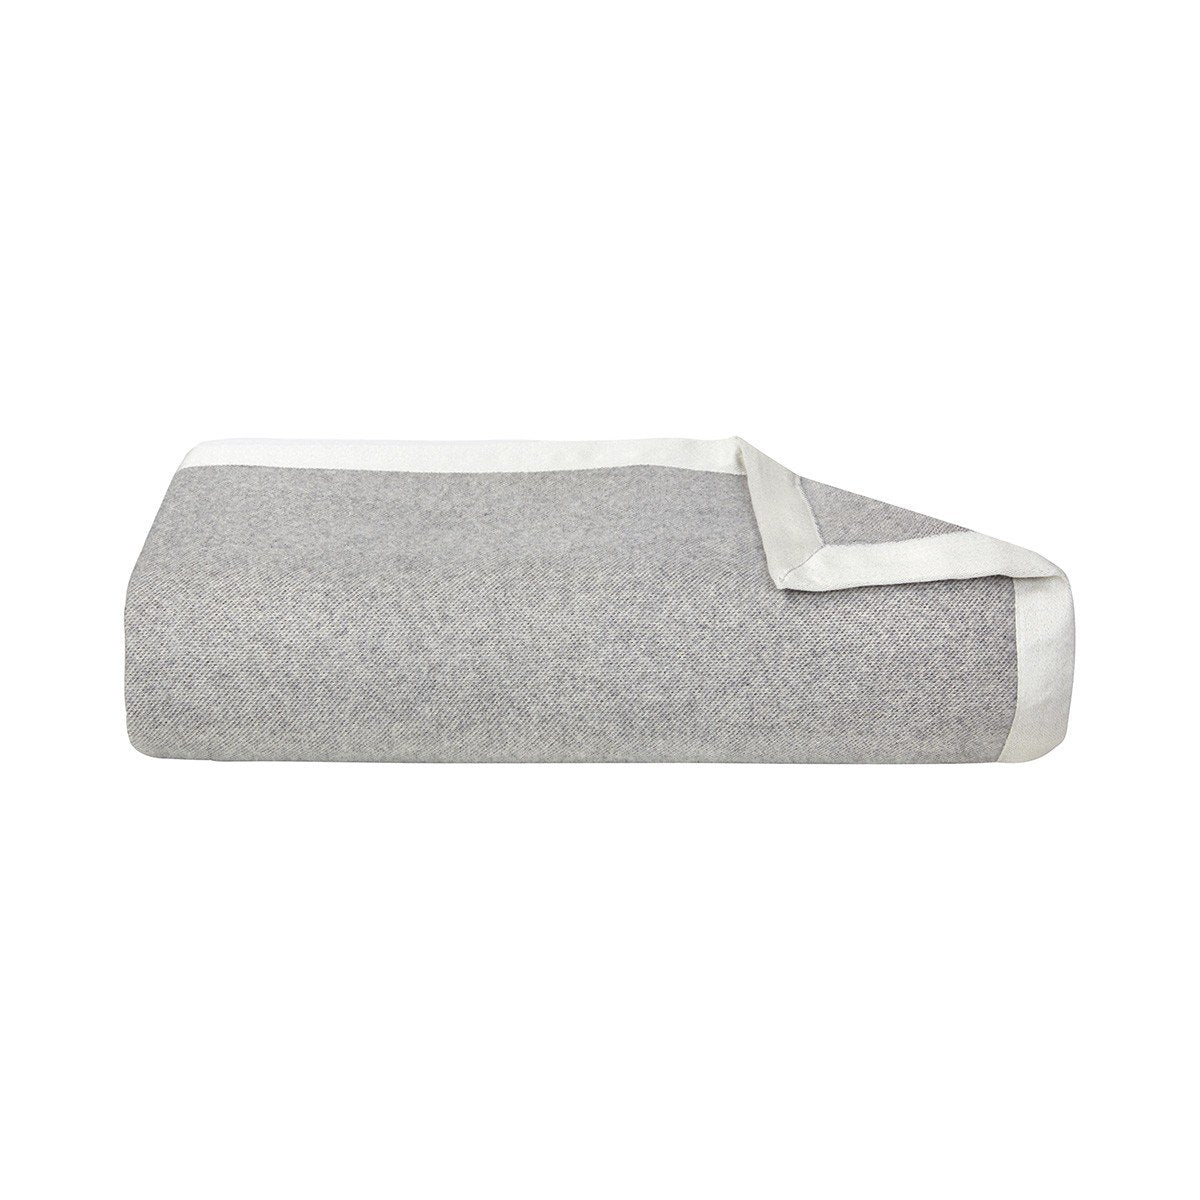 Nymphe Silver Cashmere Blanket - Yves Delorme